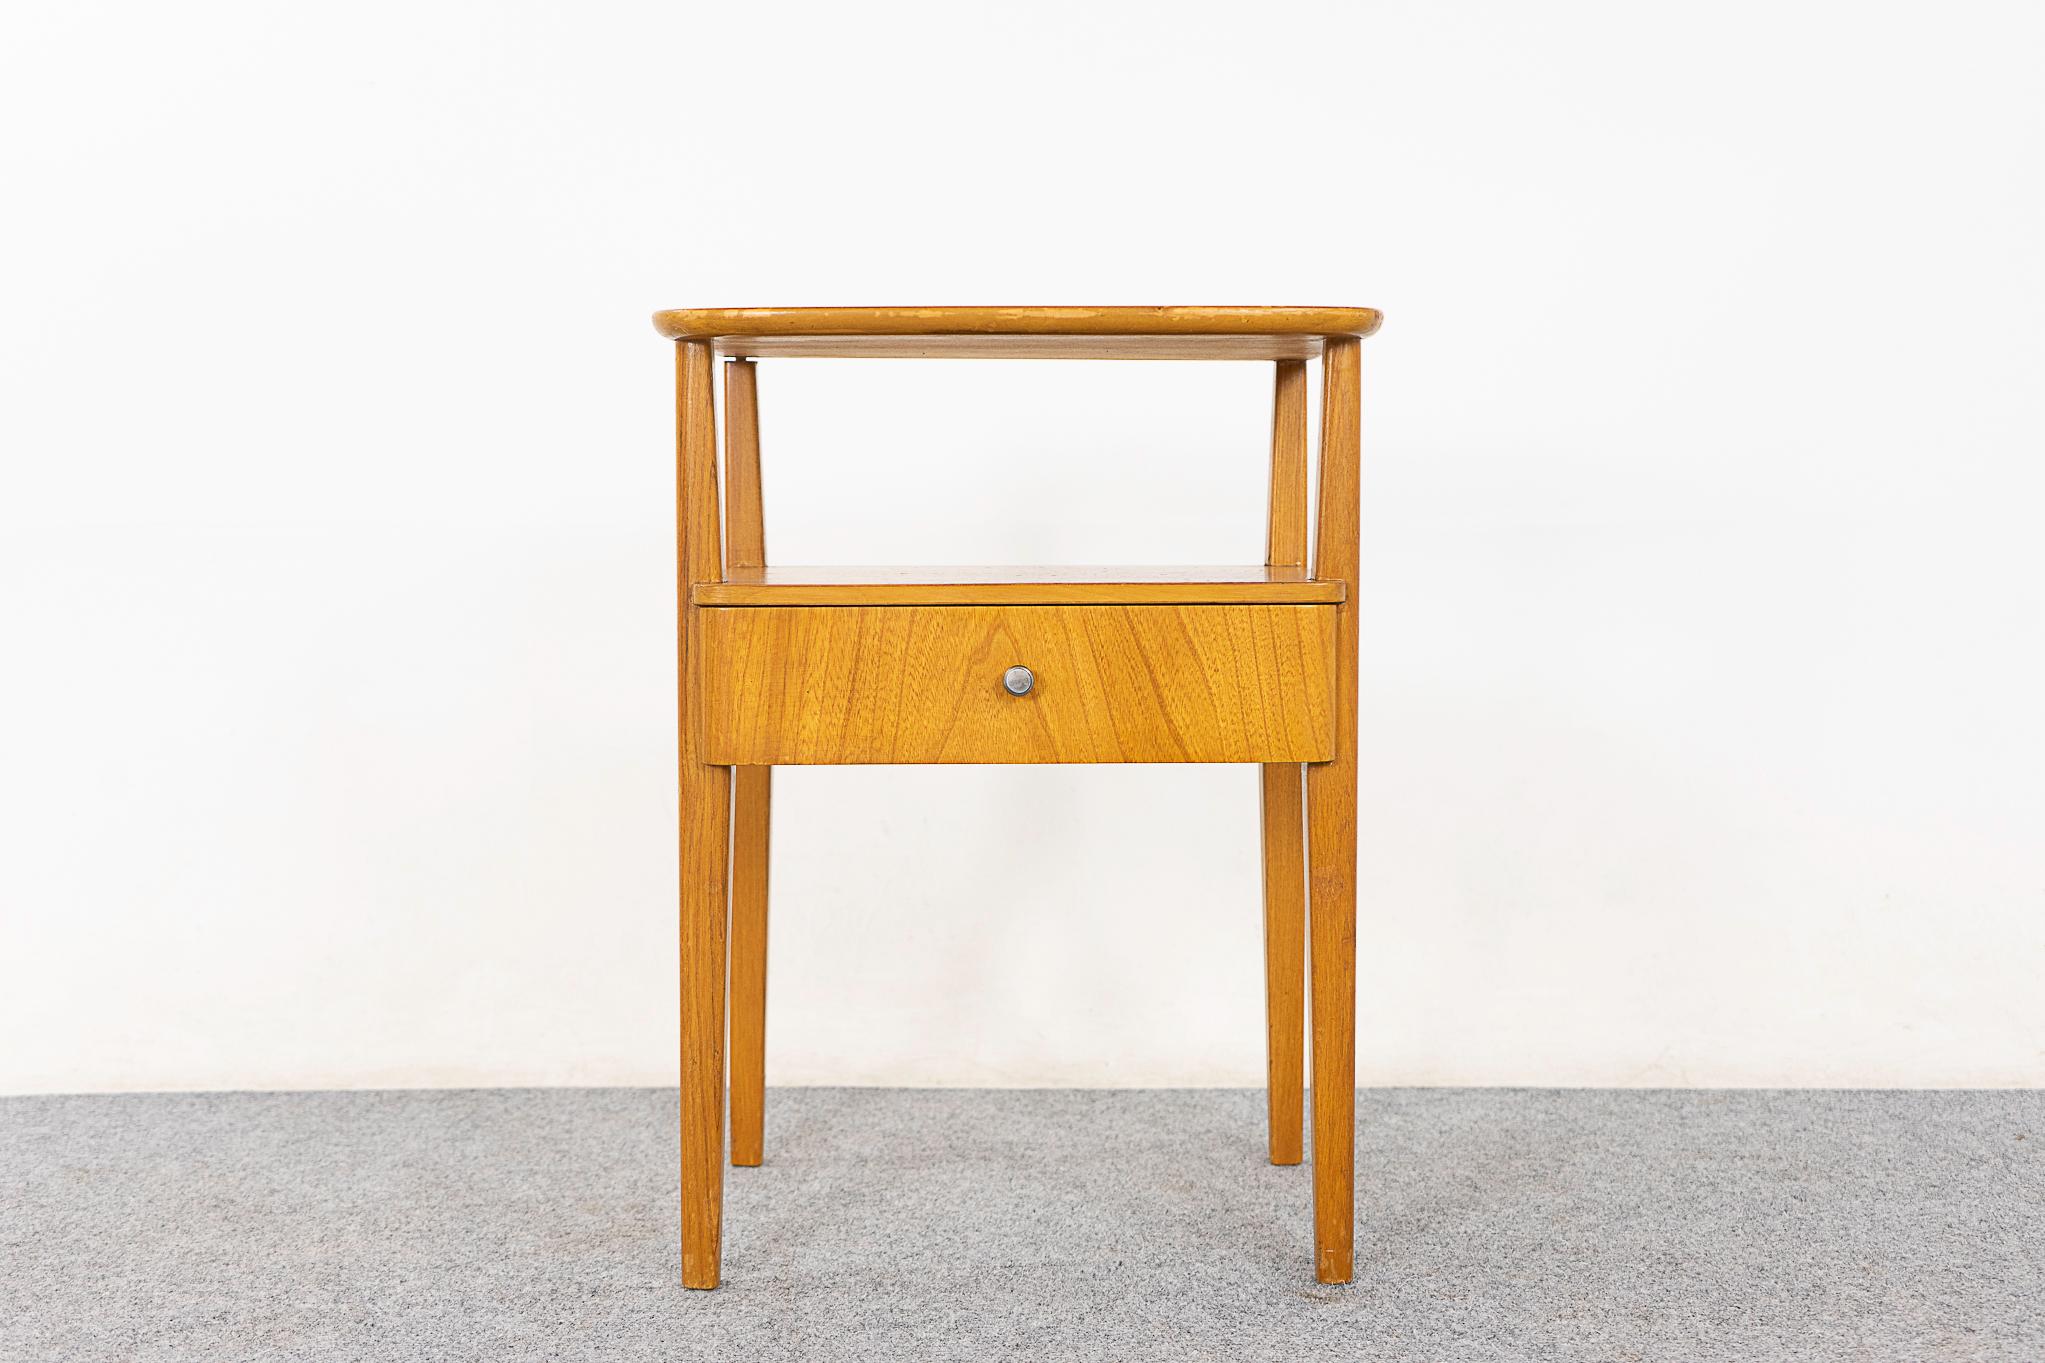 Elm mid-century modern bedside table, circa 1960's. Lovely veneered case and drawer face, tapered legs and sweet little metal pull! 

Unrestored item with option to purchase in restored condition for an additional $150 USD. Restoration includes: